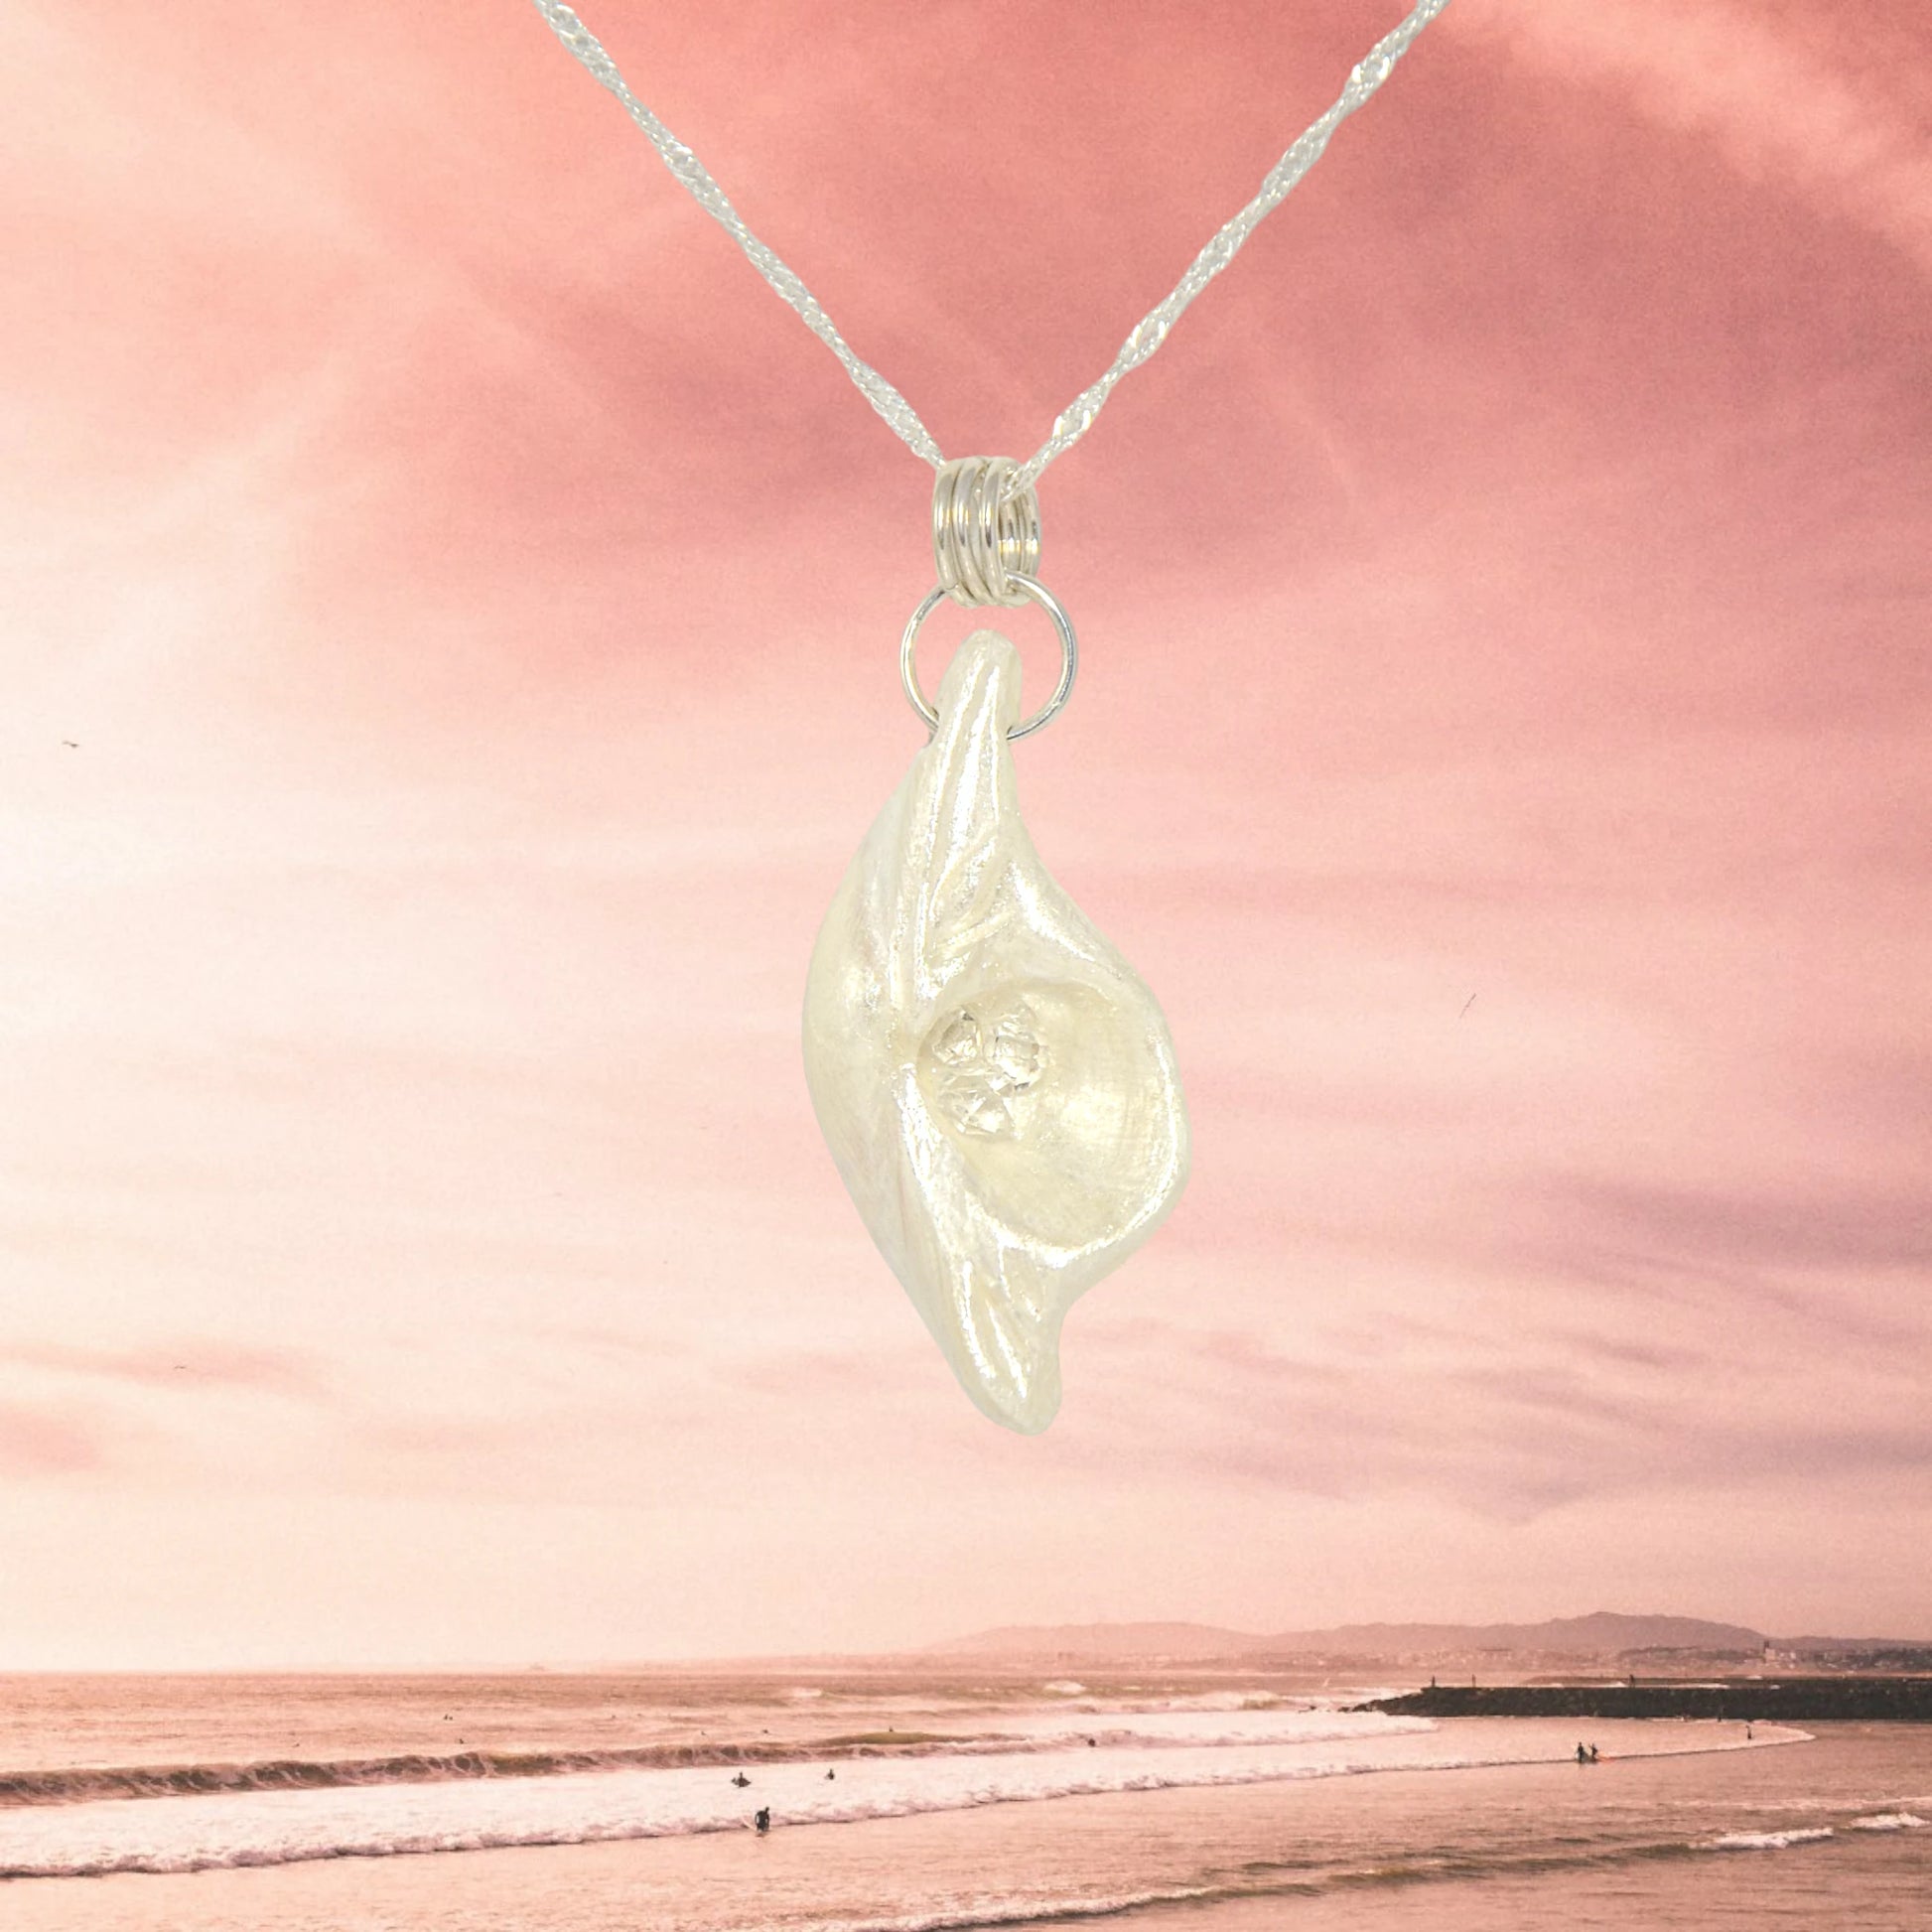 Halo natural seashell pendant with three herkimer diamonds. The pendant is shown with a pink sky and ocean waves.